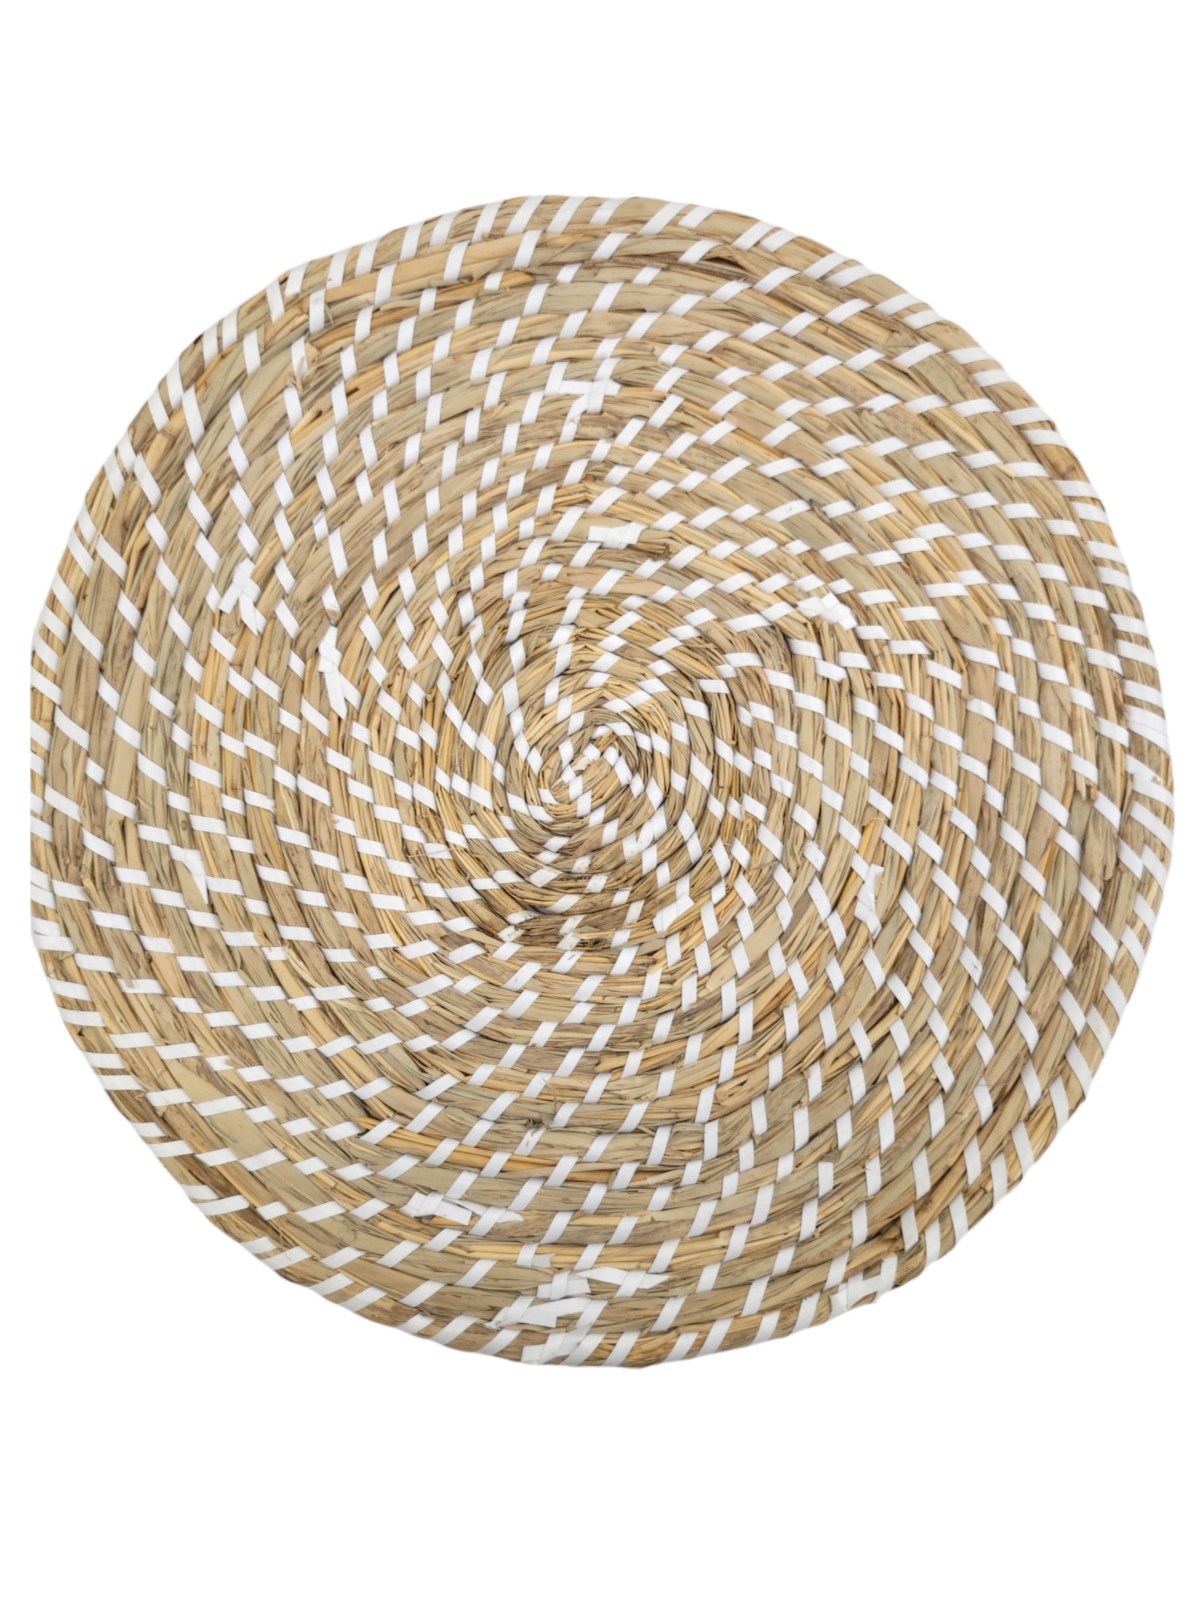 Wicker placemats